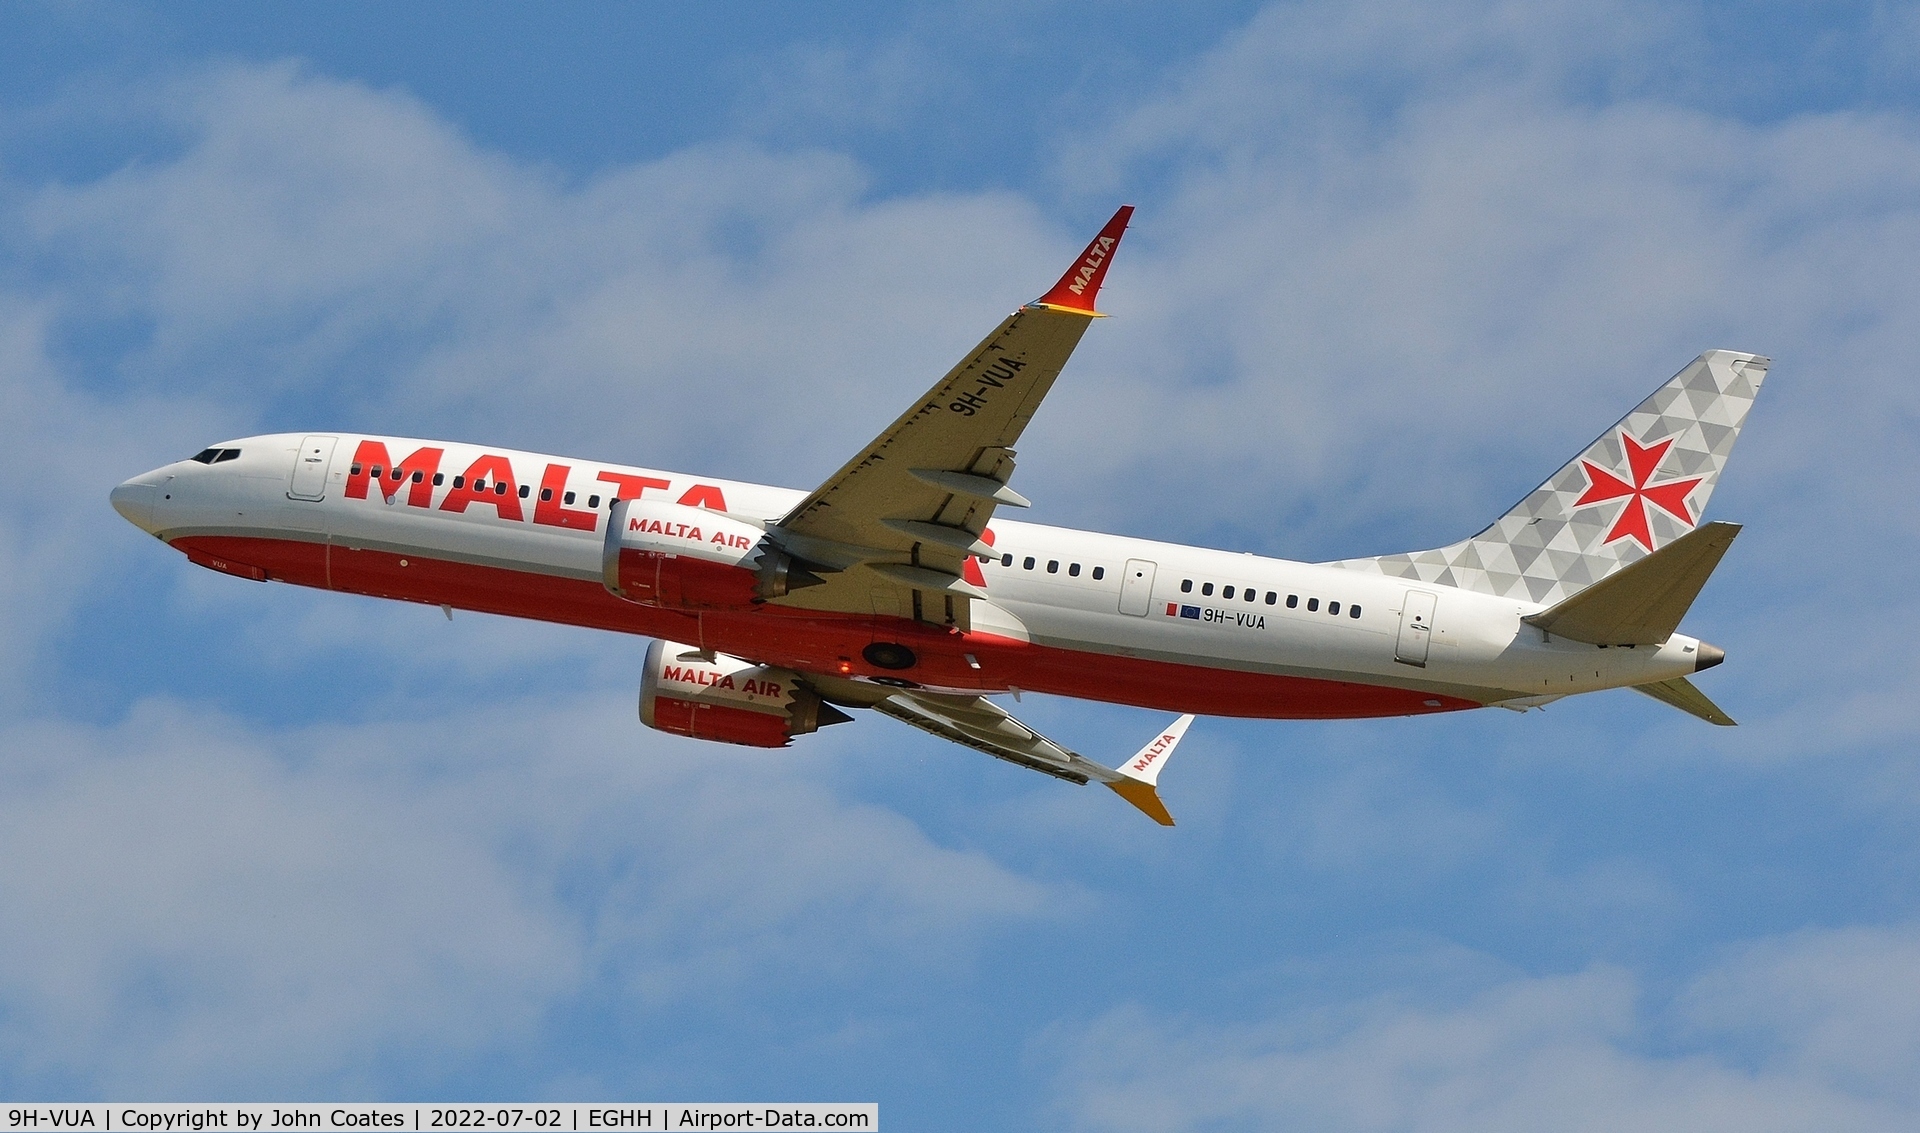 9H-VUA, 2021 Boeing 737-8-200 MAX C/N 65874, Departing after first visit of an aircraft in new Malta Air livery